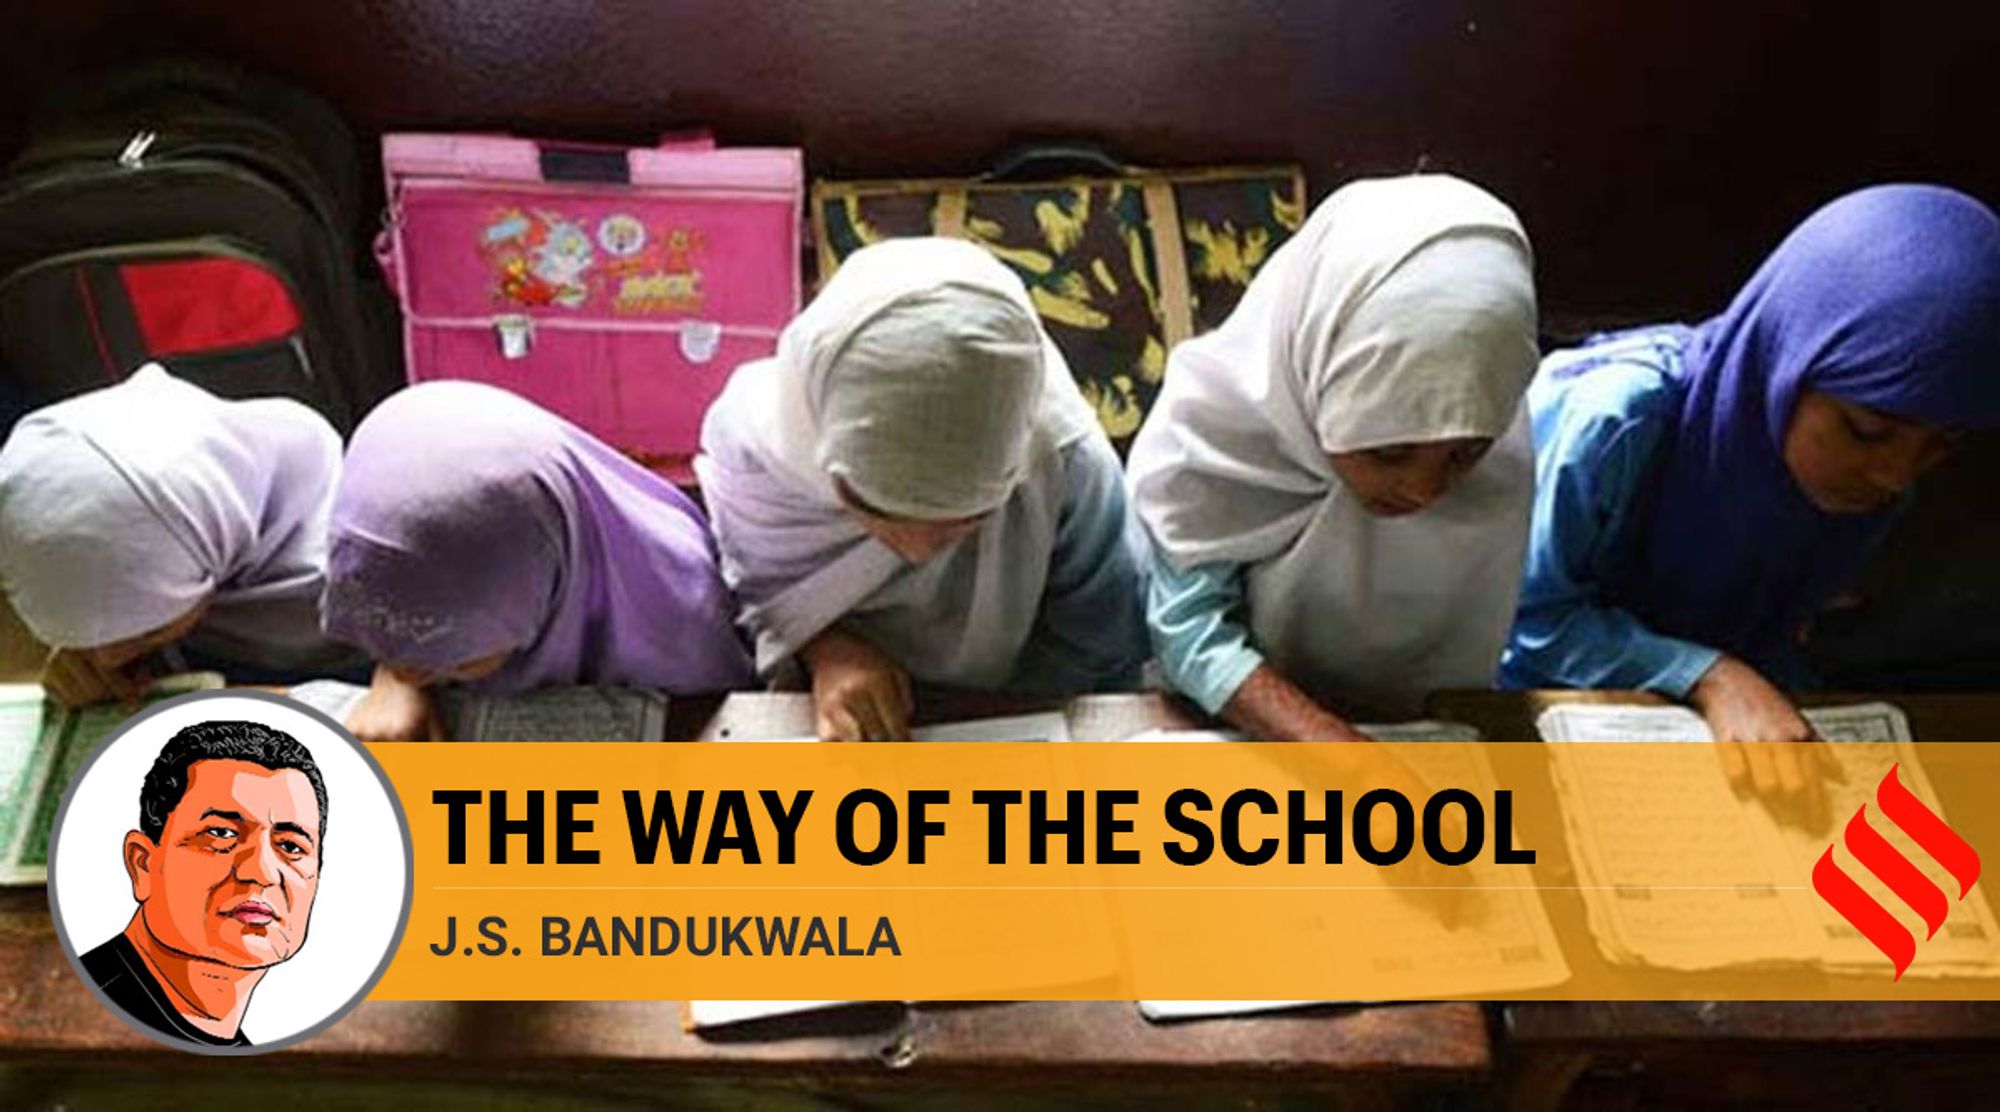 Quality of education, not religiosity, must be road ahead for Muslim community